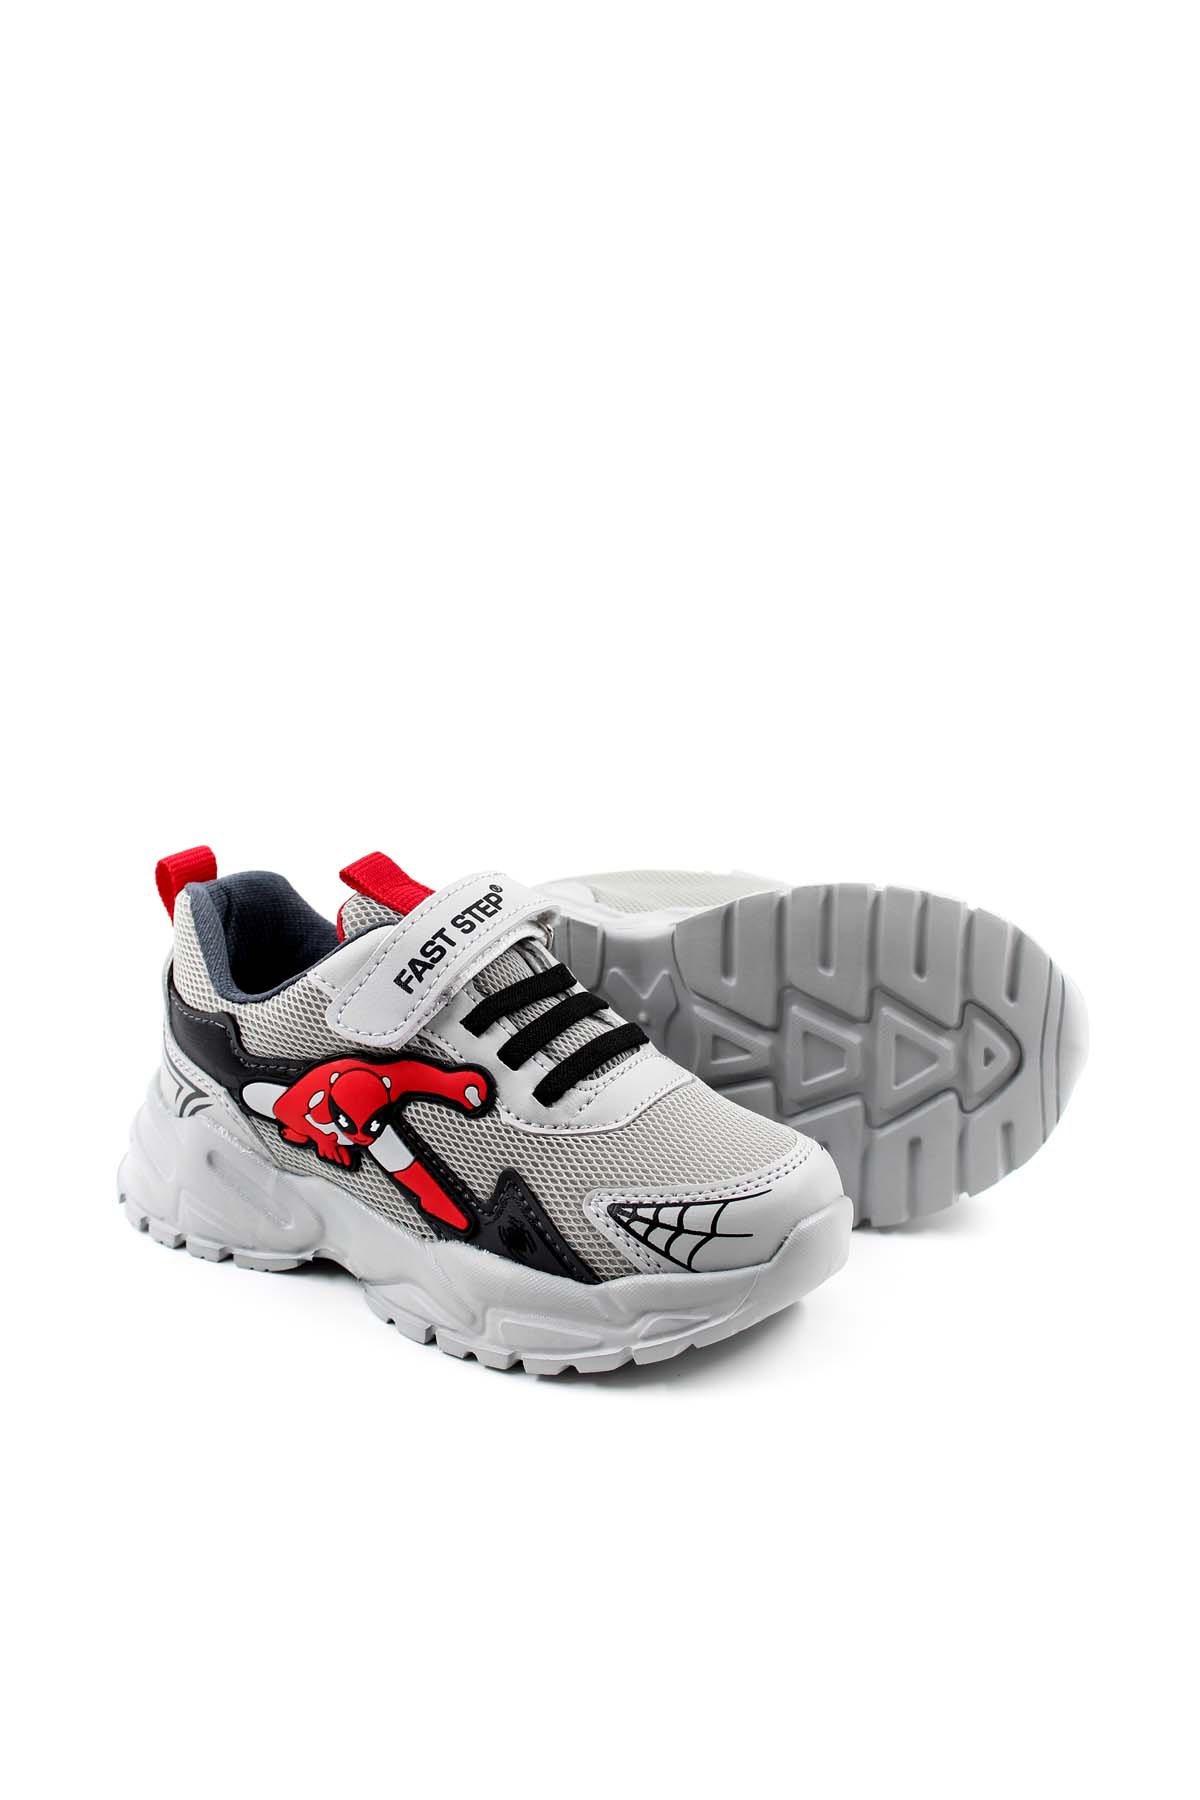 Fast Step Kids Unisex Boys Sport Shoes Ice Red 615XCA151